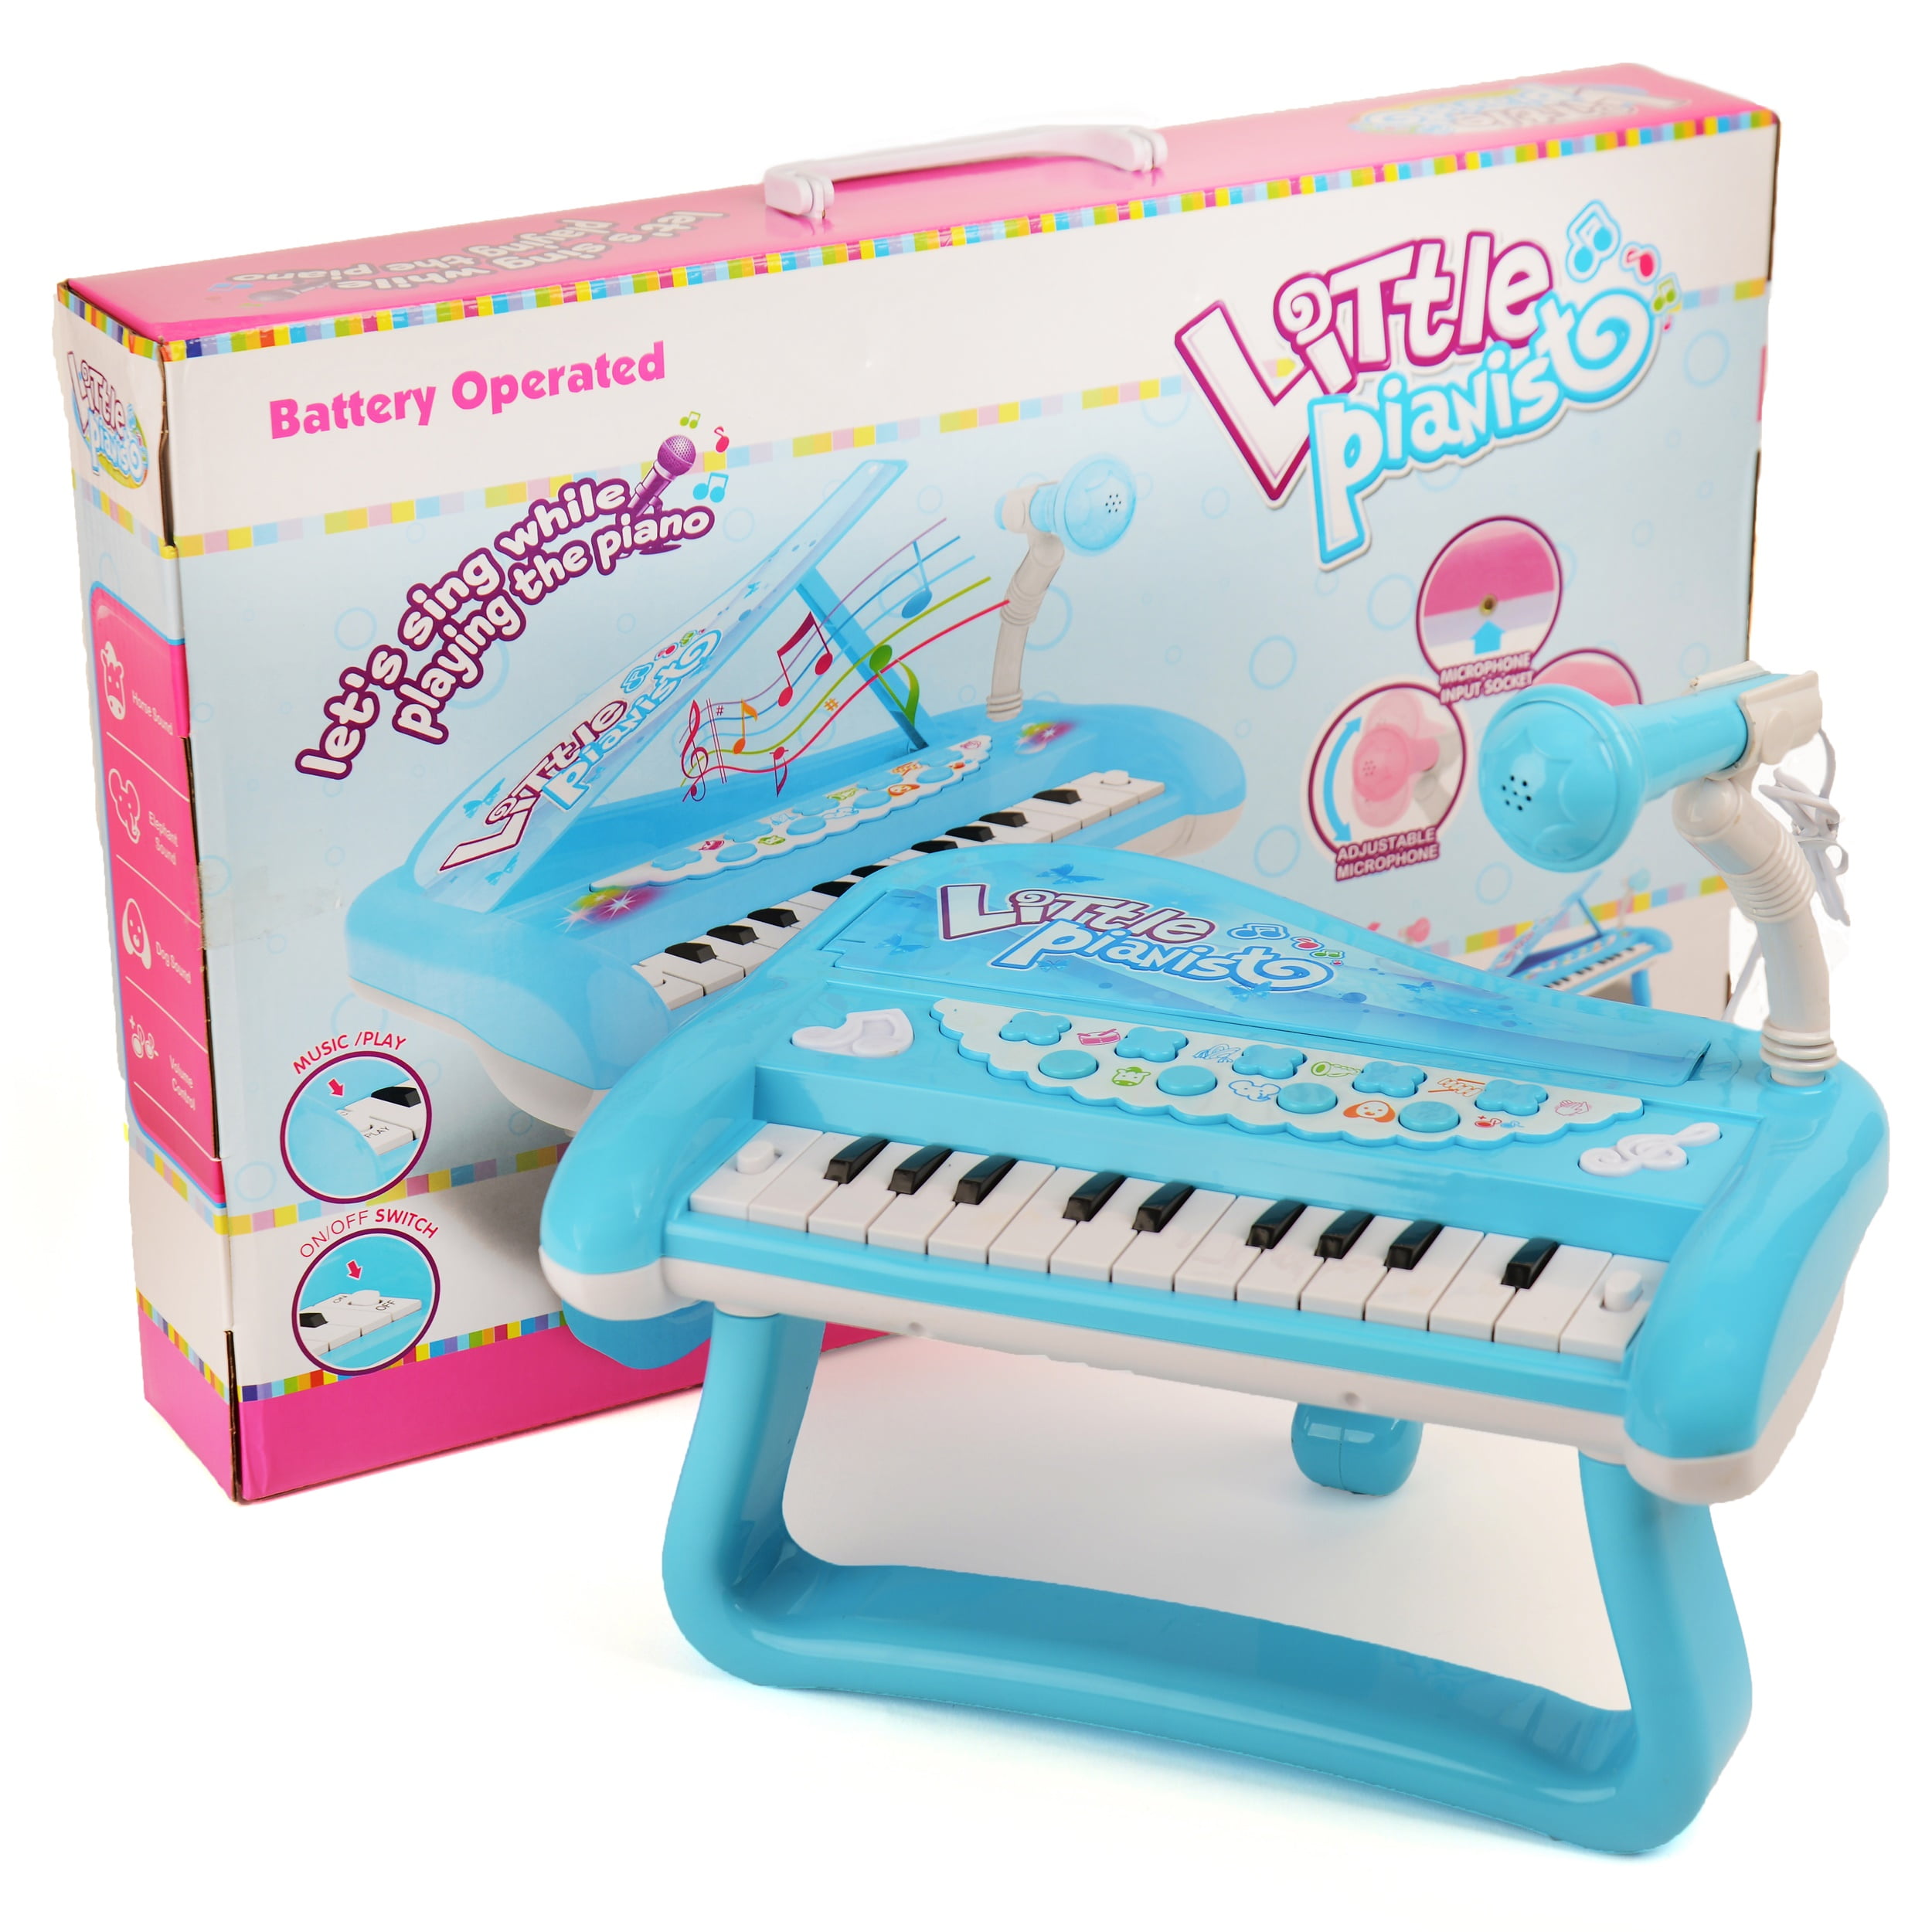 Musical Toy Set Electronic Grand Piano Keyboard With Microphone And Lights  For Pretend Play And Educational Development (Pink) 